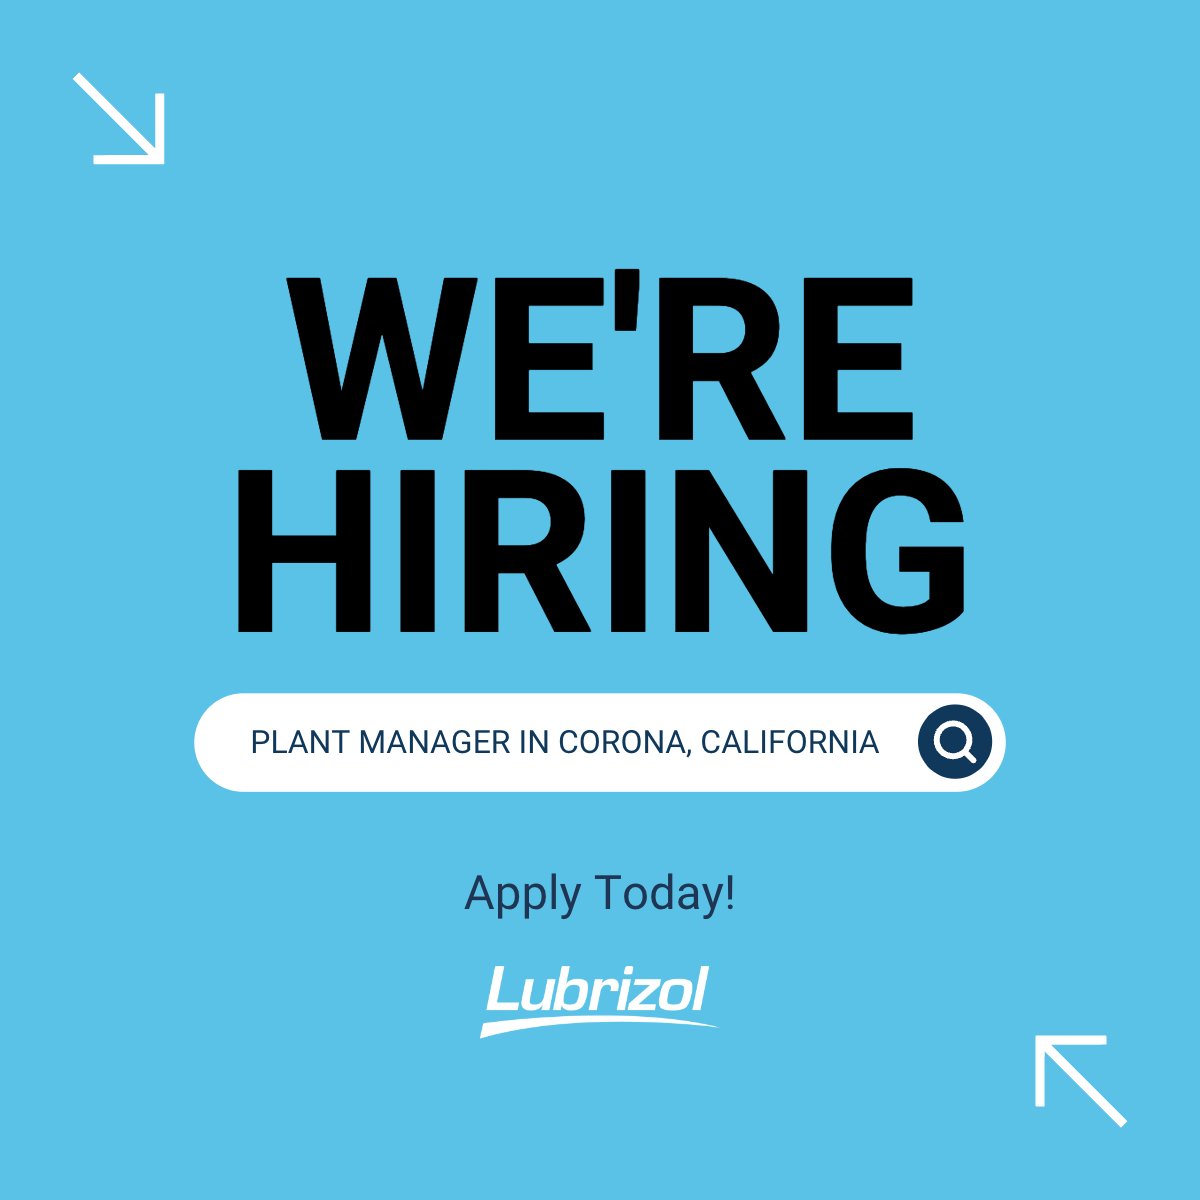 If you have a passion for upholding a culture of safety and being involved in multiple business functions, this job might be for you! We’re looking for a Plant Manager for our location in Corona, California. go.lubrizol.com/xnhm6cqz #Hiring #NewJobs